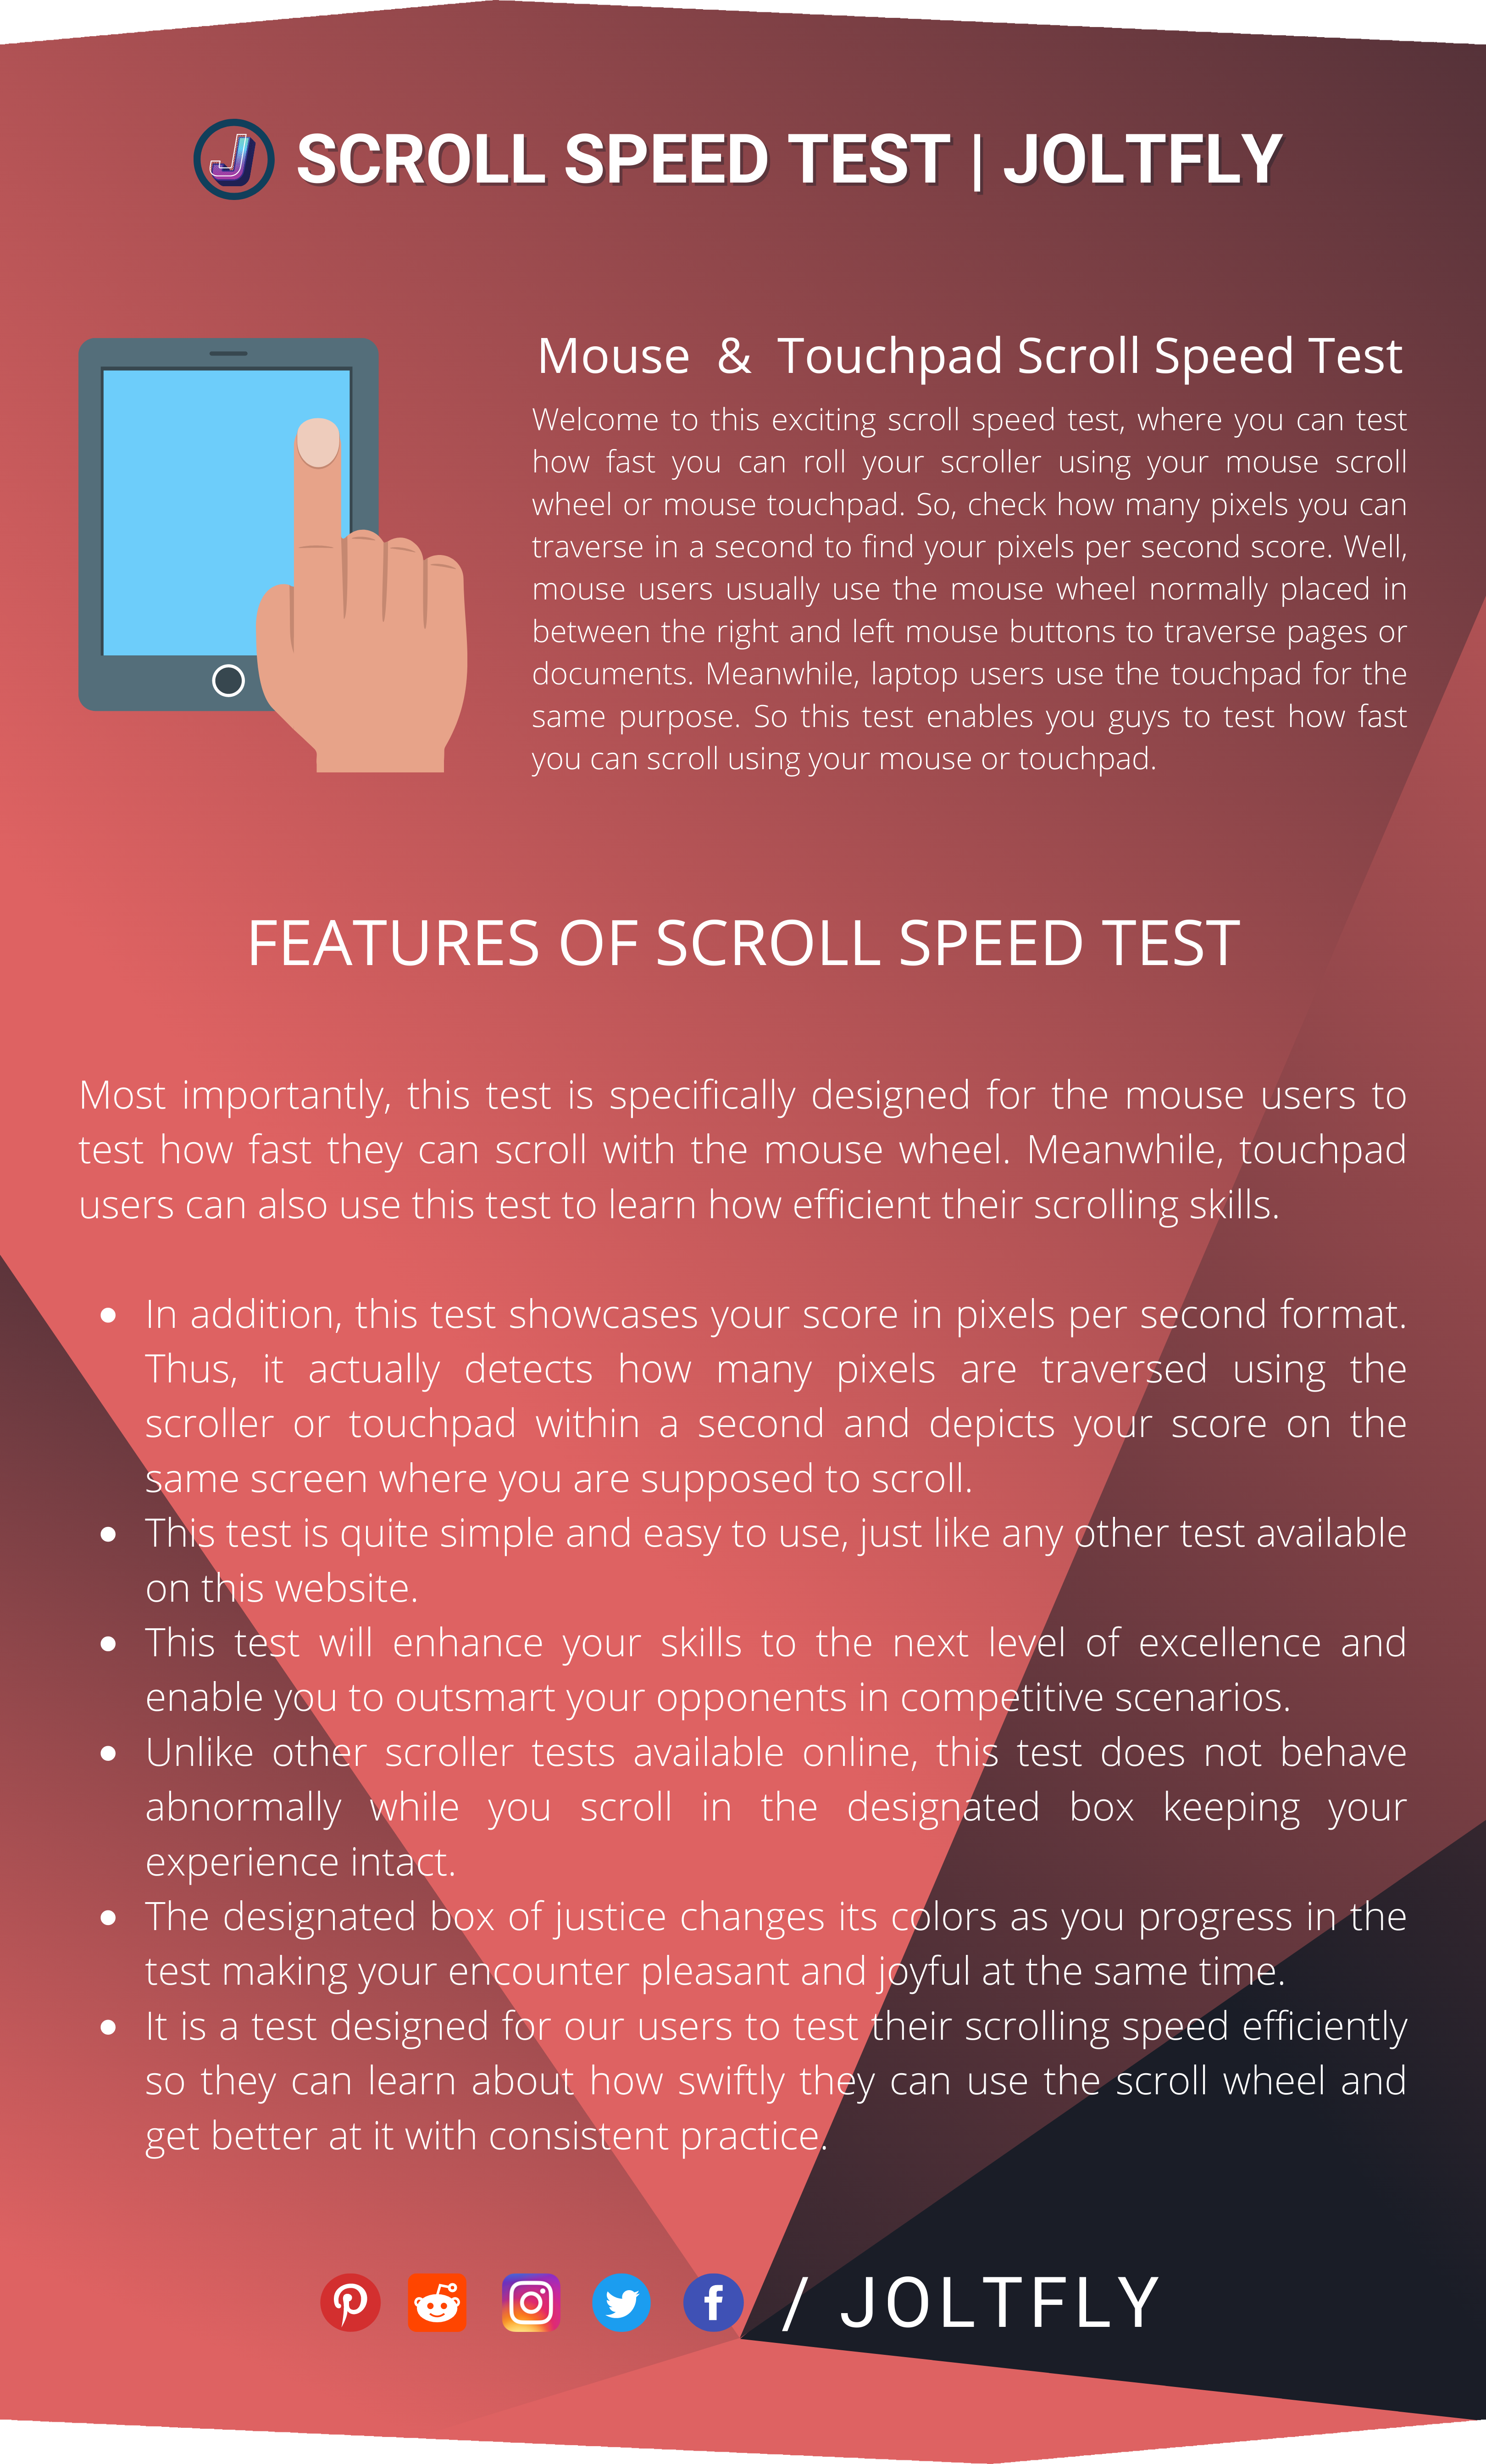 Joltfly | Scroll Speed Test Features